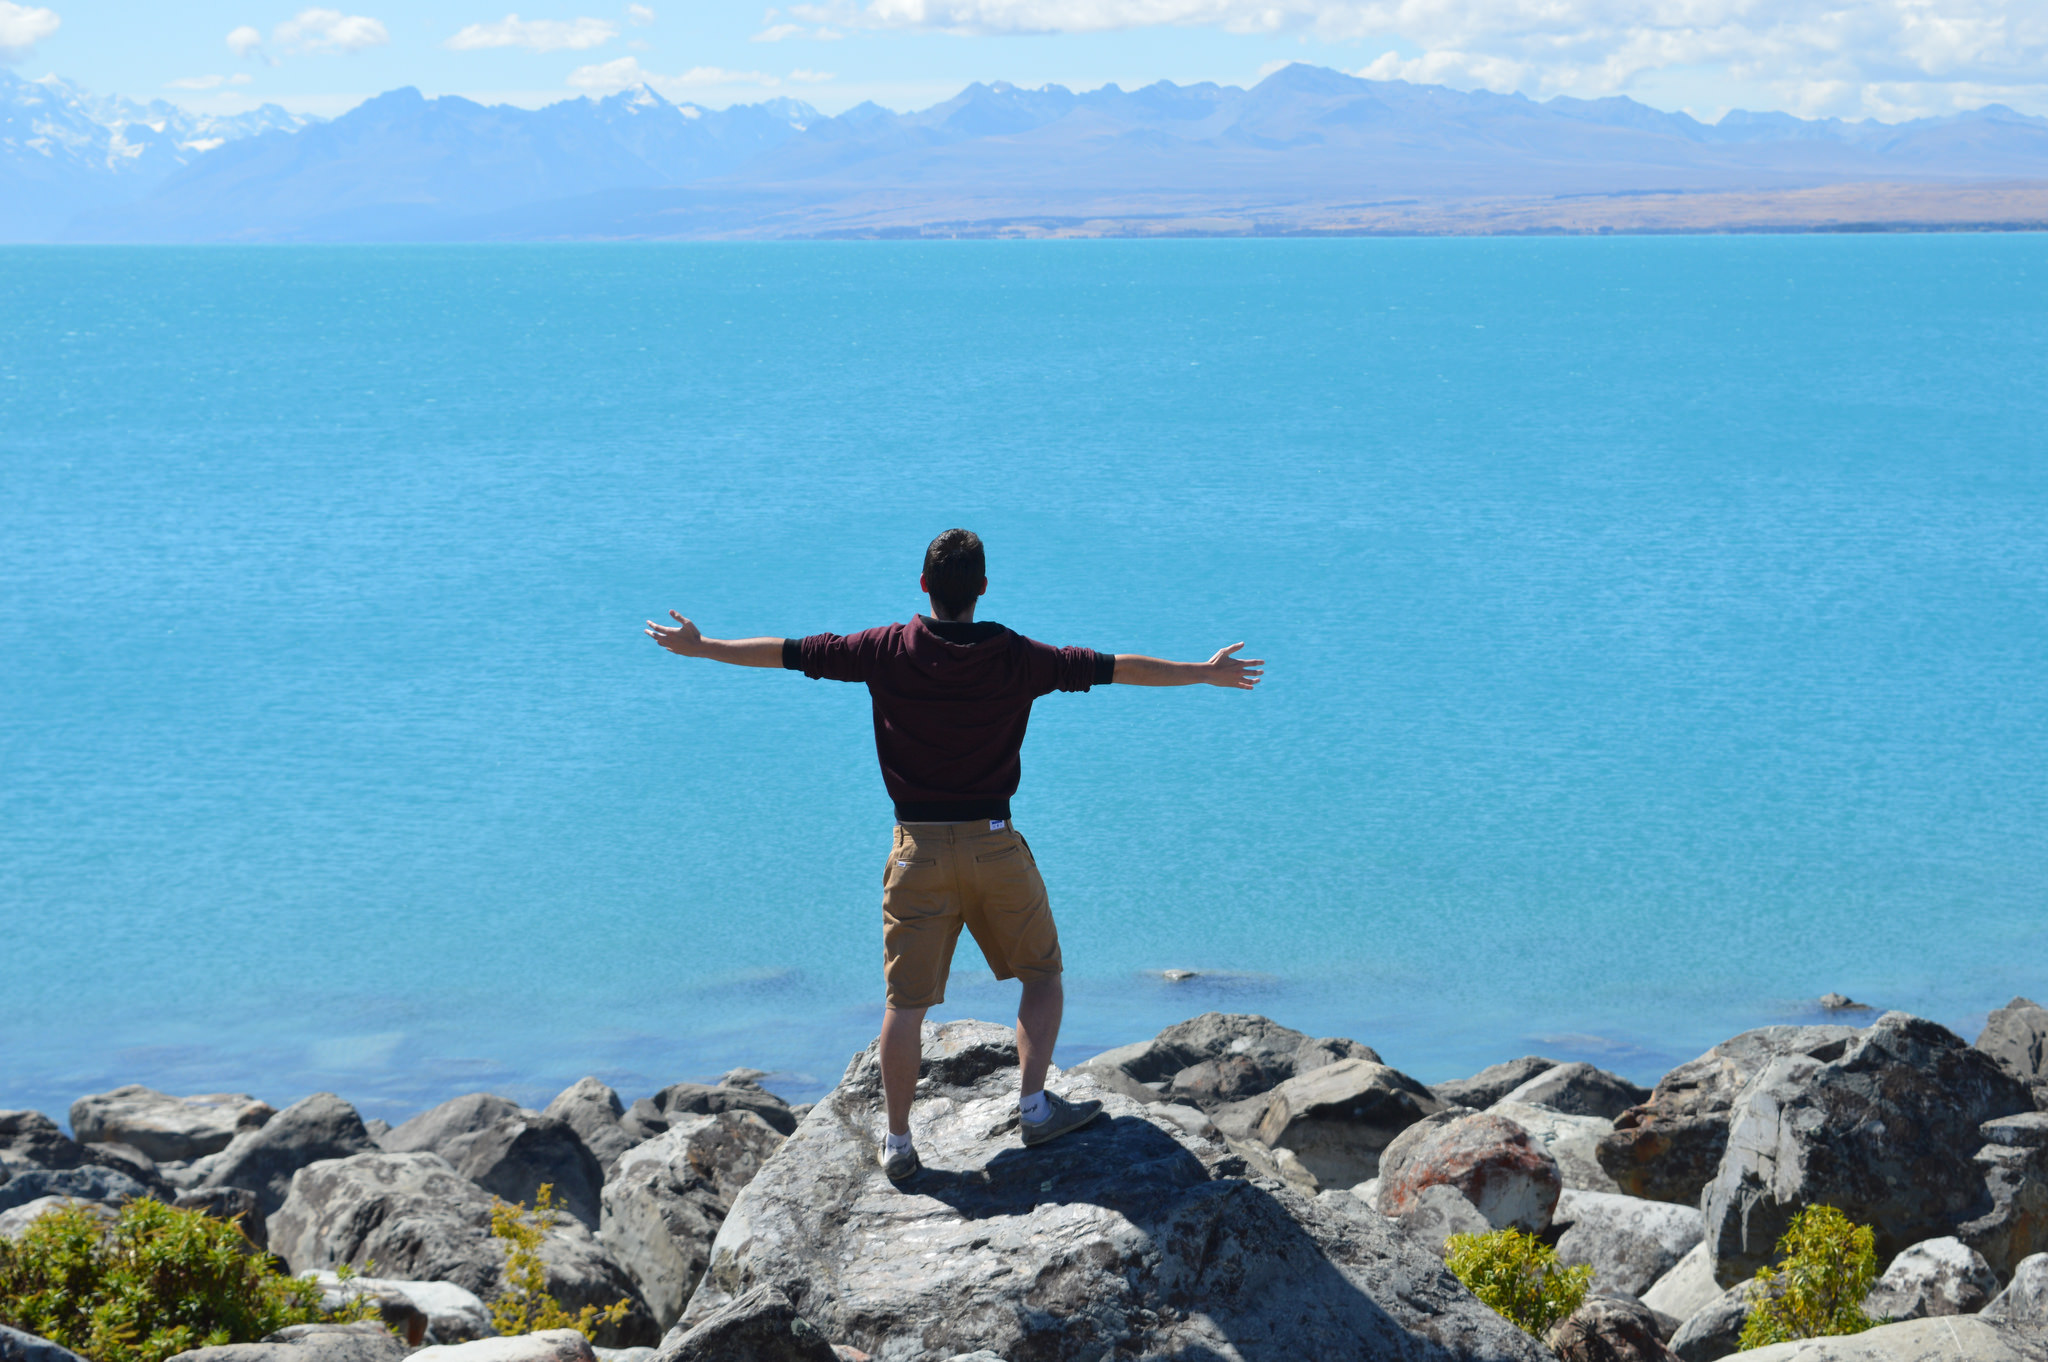 New Zealand is pretty awemsome, again